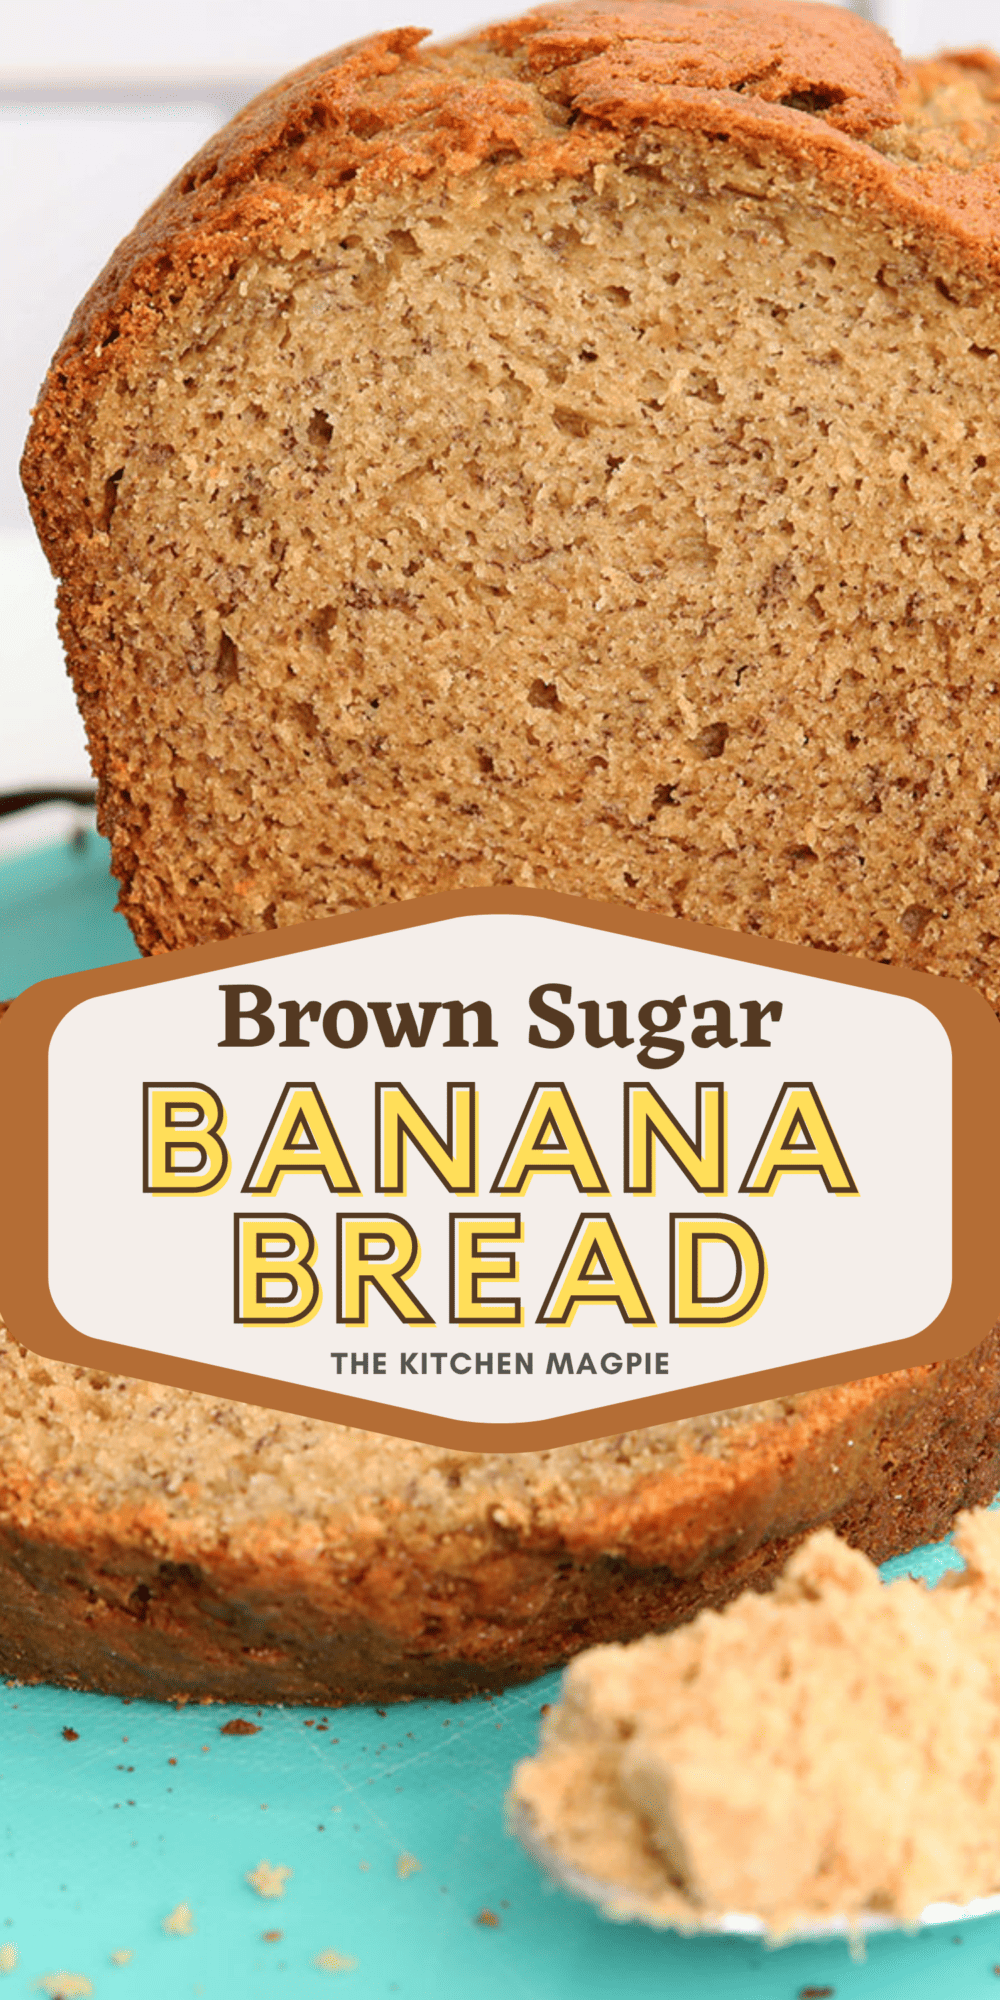 This Brown Sugar Banana Bread will be wonderfully moist throughout, with a nice caramel flavor from the sugar and that dense banana flavor we all love. 